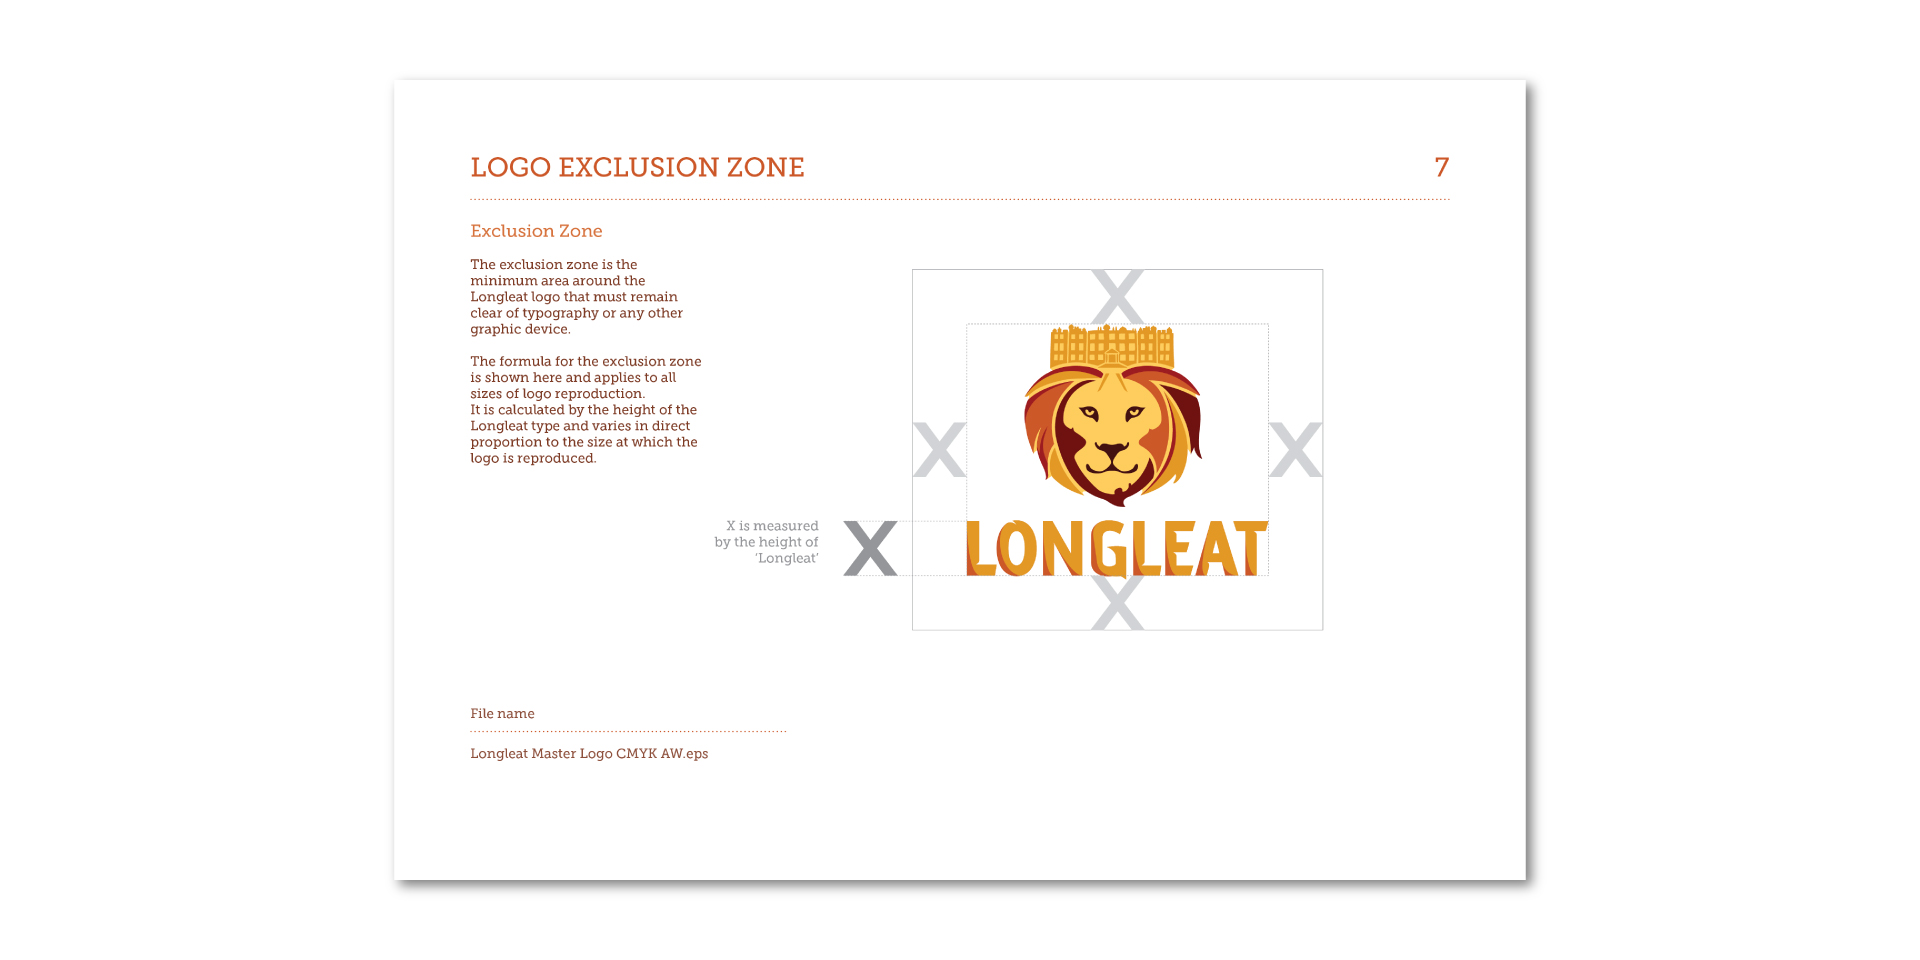 Longleat brand guidelines